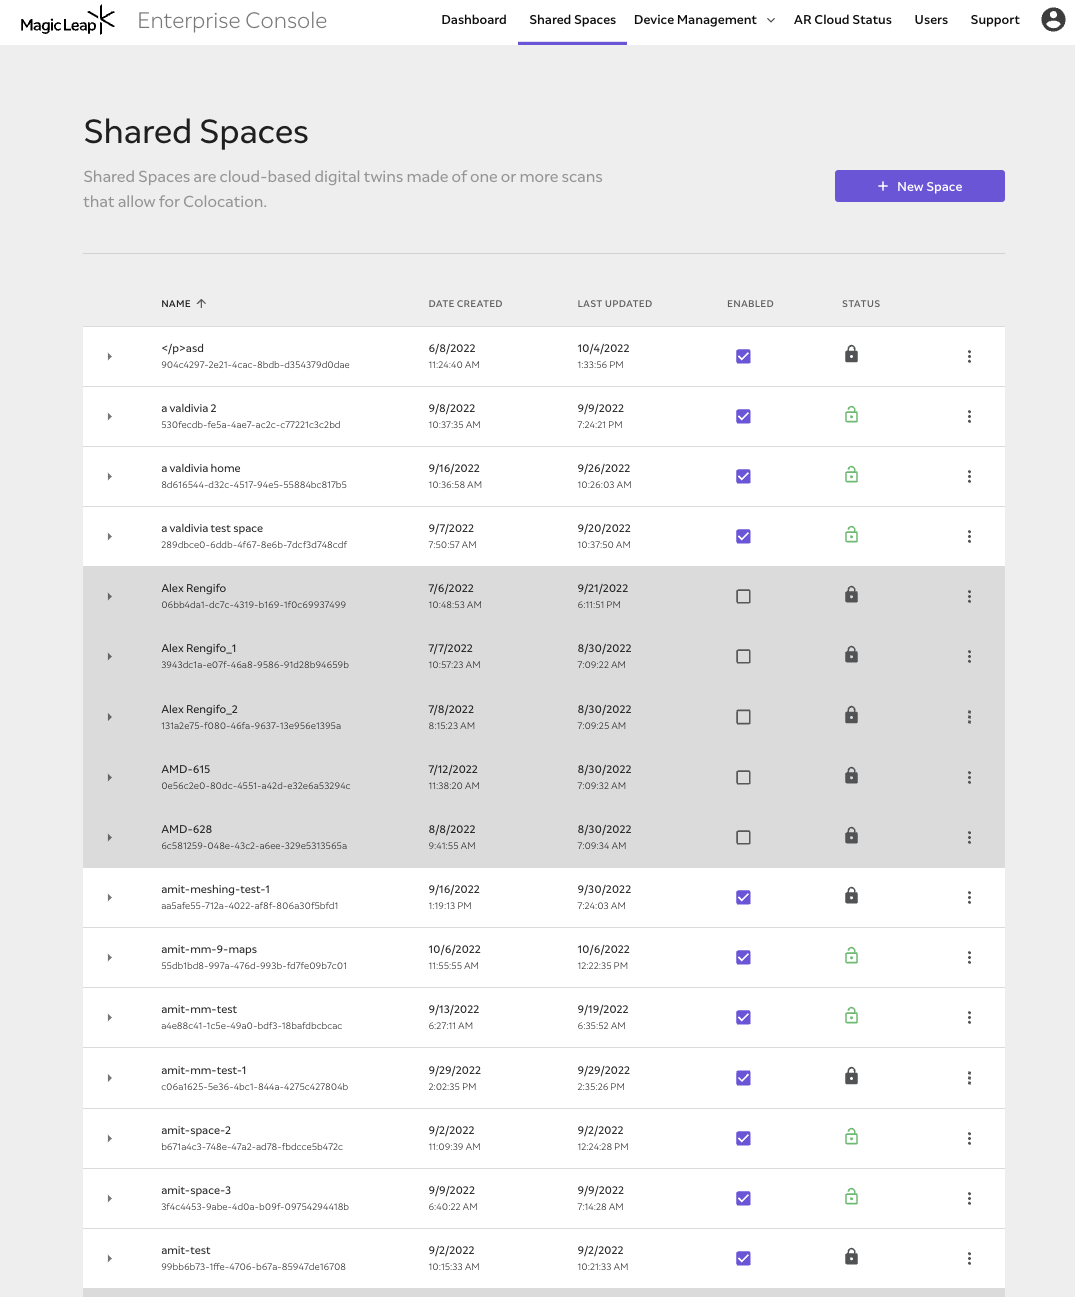 The shared spaces dashboard with a list of spaces